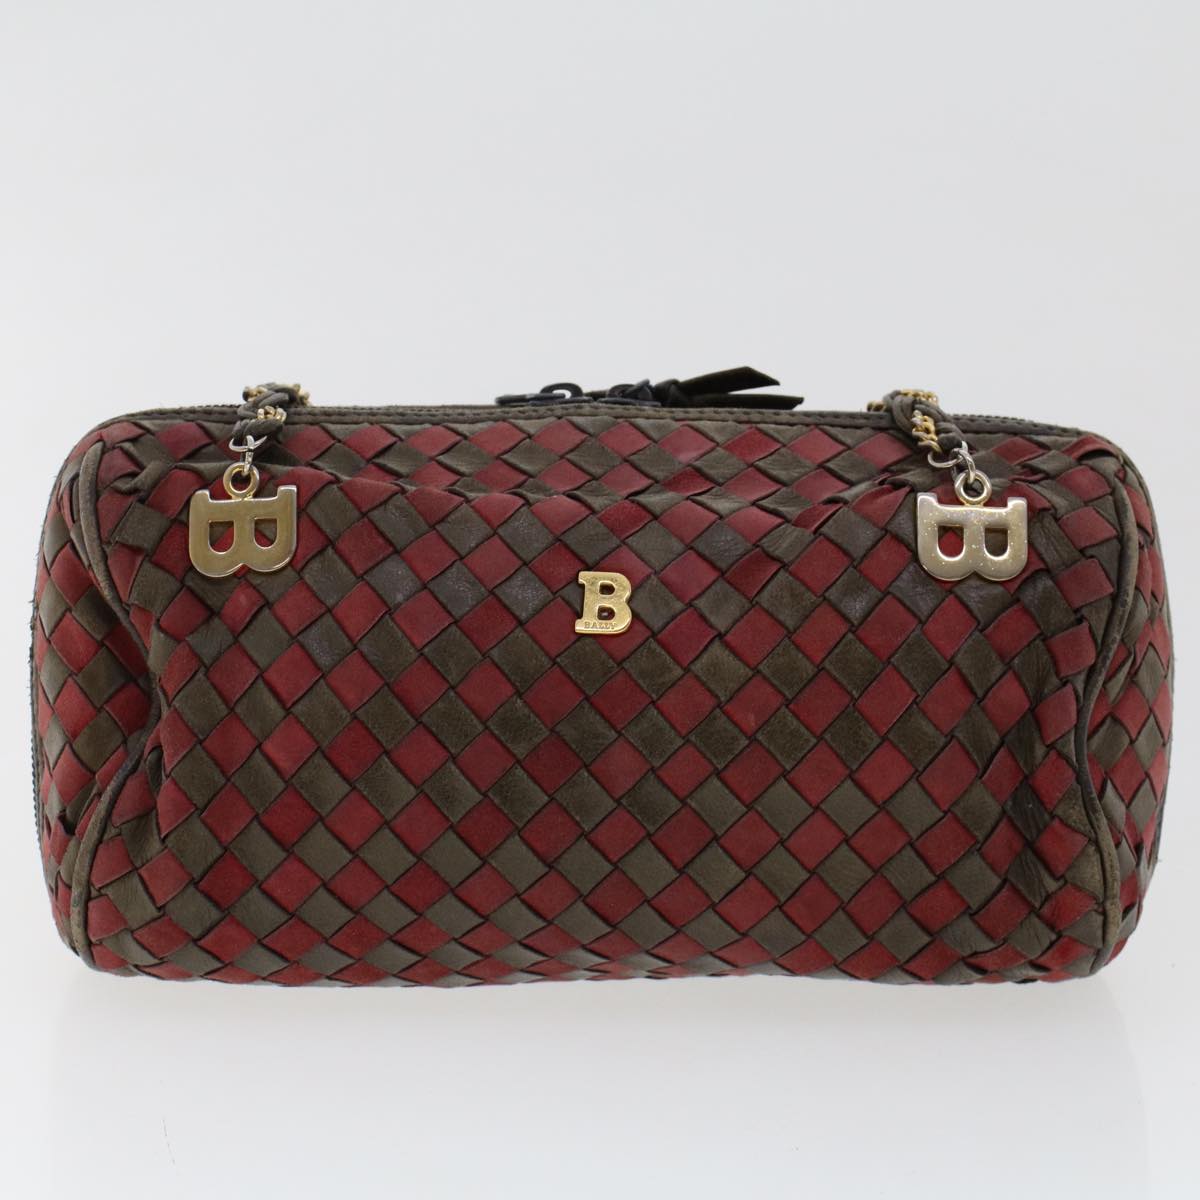 BALLY Chain Hand Bag Leather 2Set Red Black Auth yb257